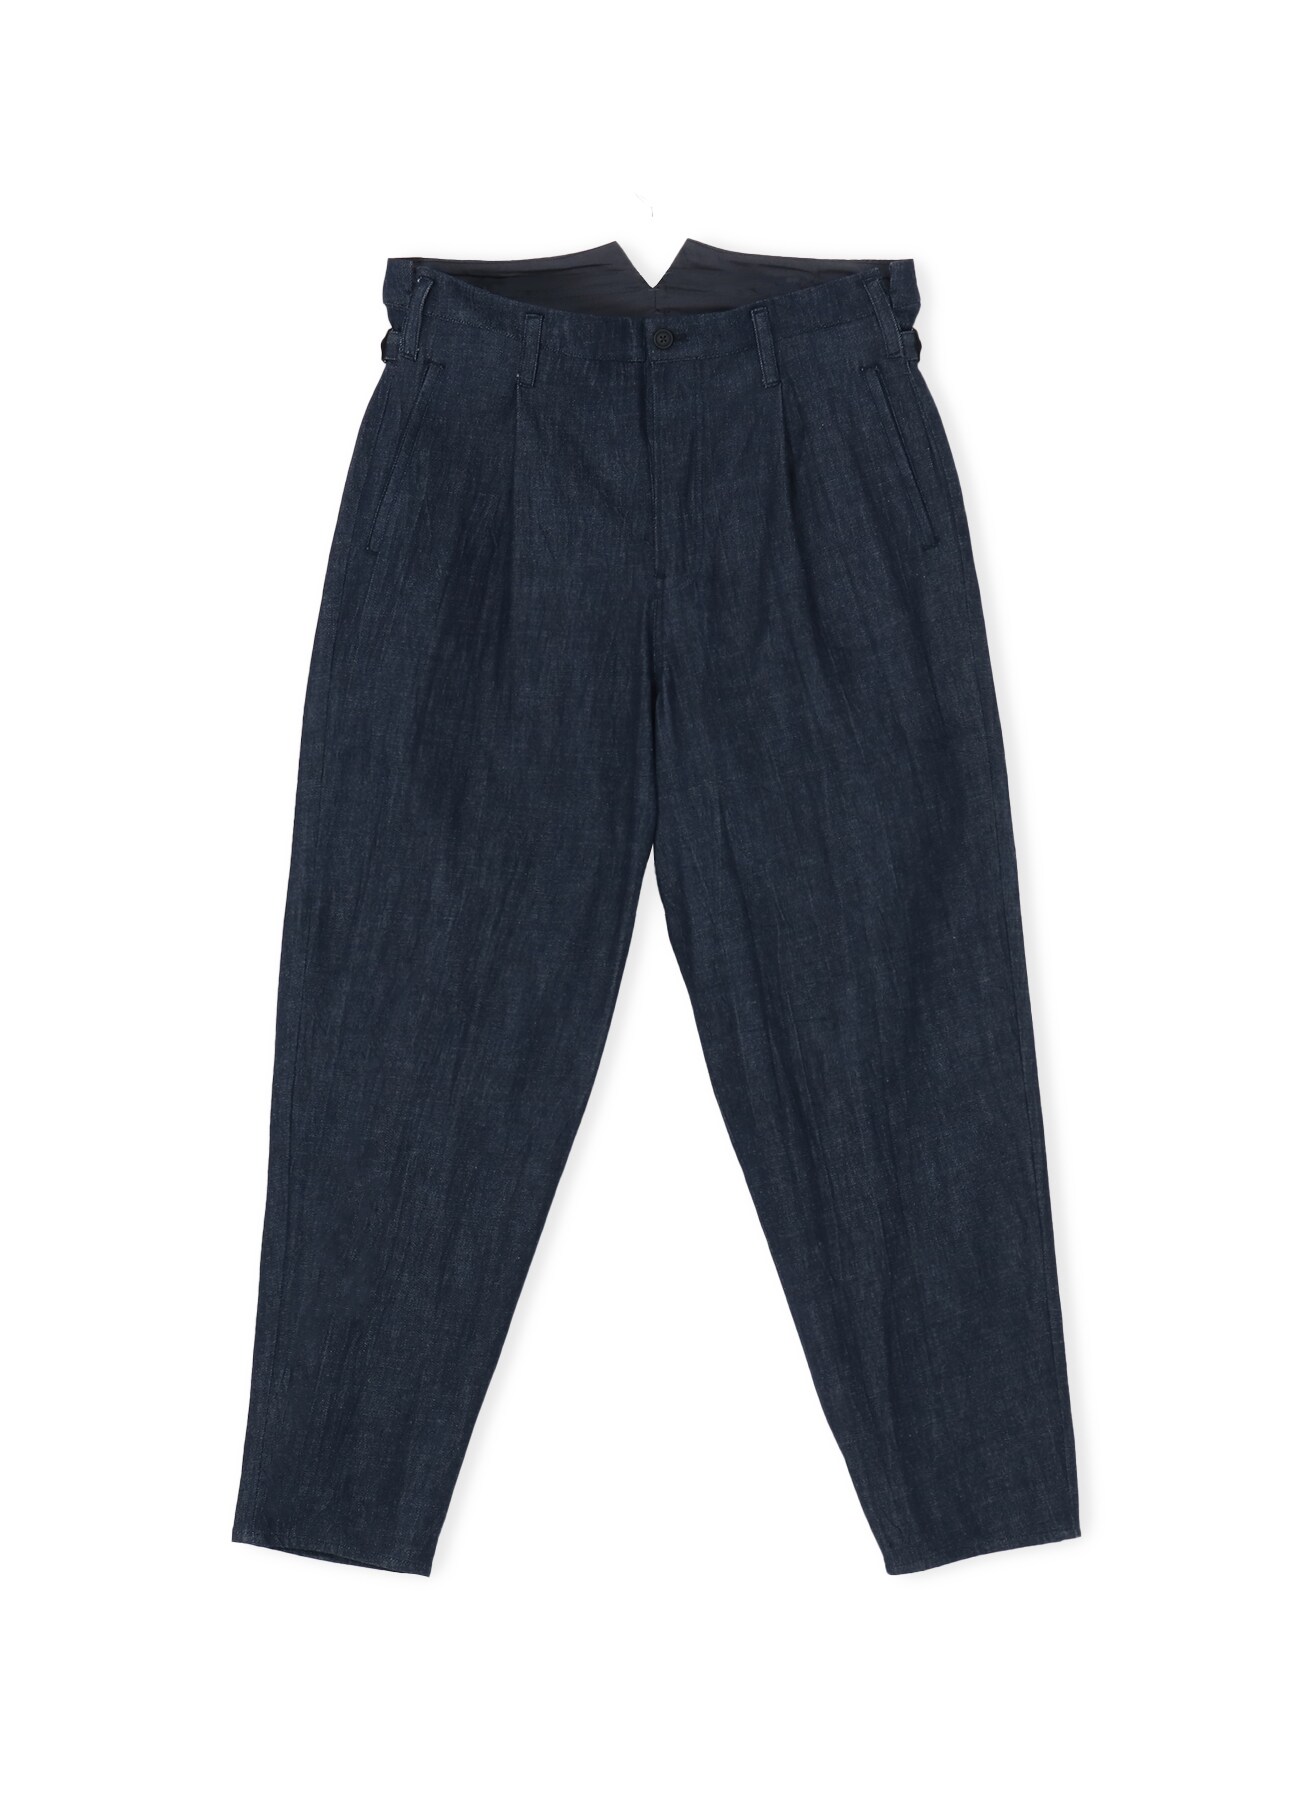 DENIM PANTS WITH SUSPENDER BUTTONS AND ADJUSTABLE SIDE TABS